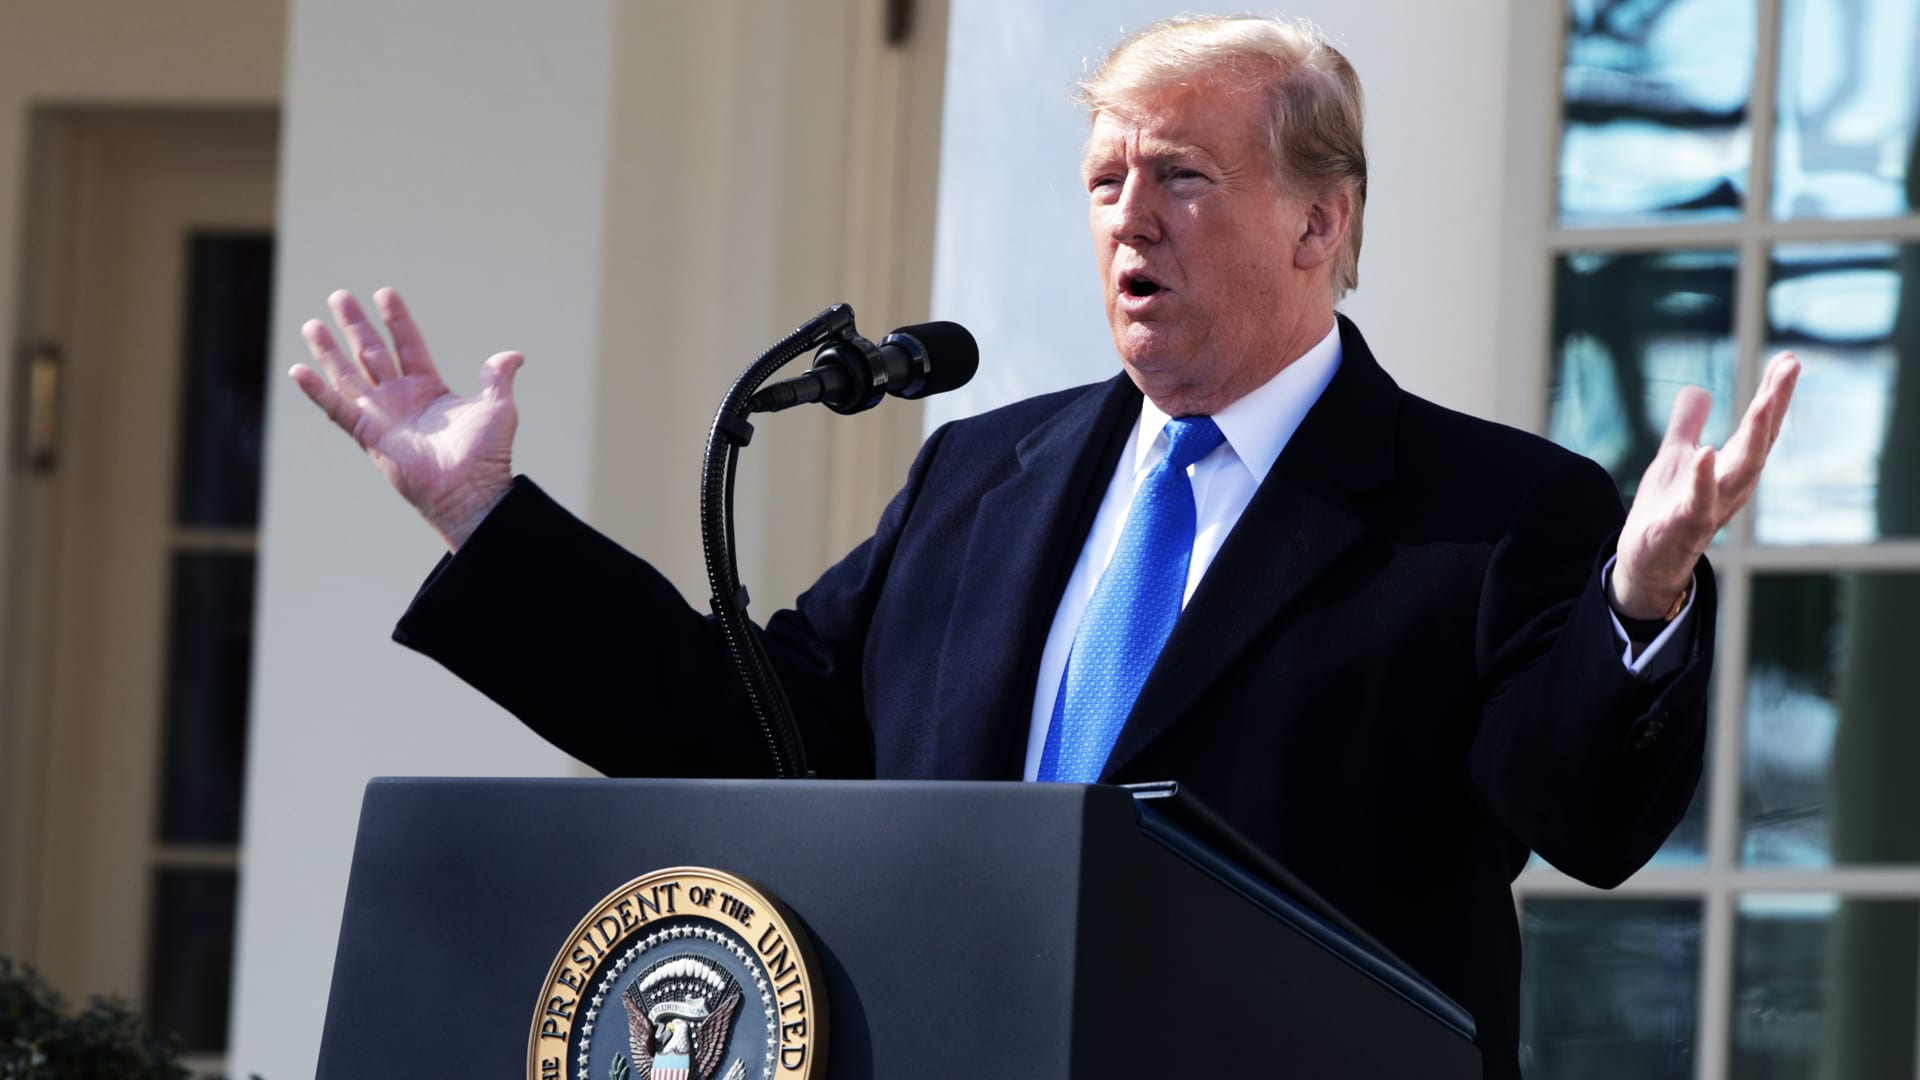 Trump admits “I didn’t need to do this” during national emergency speech